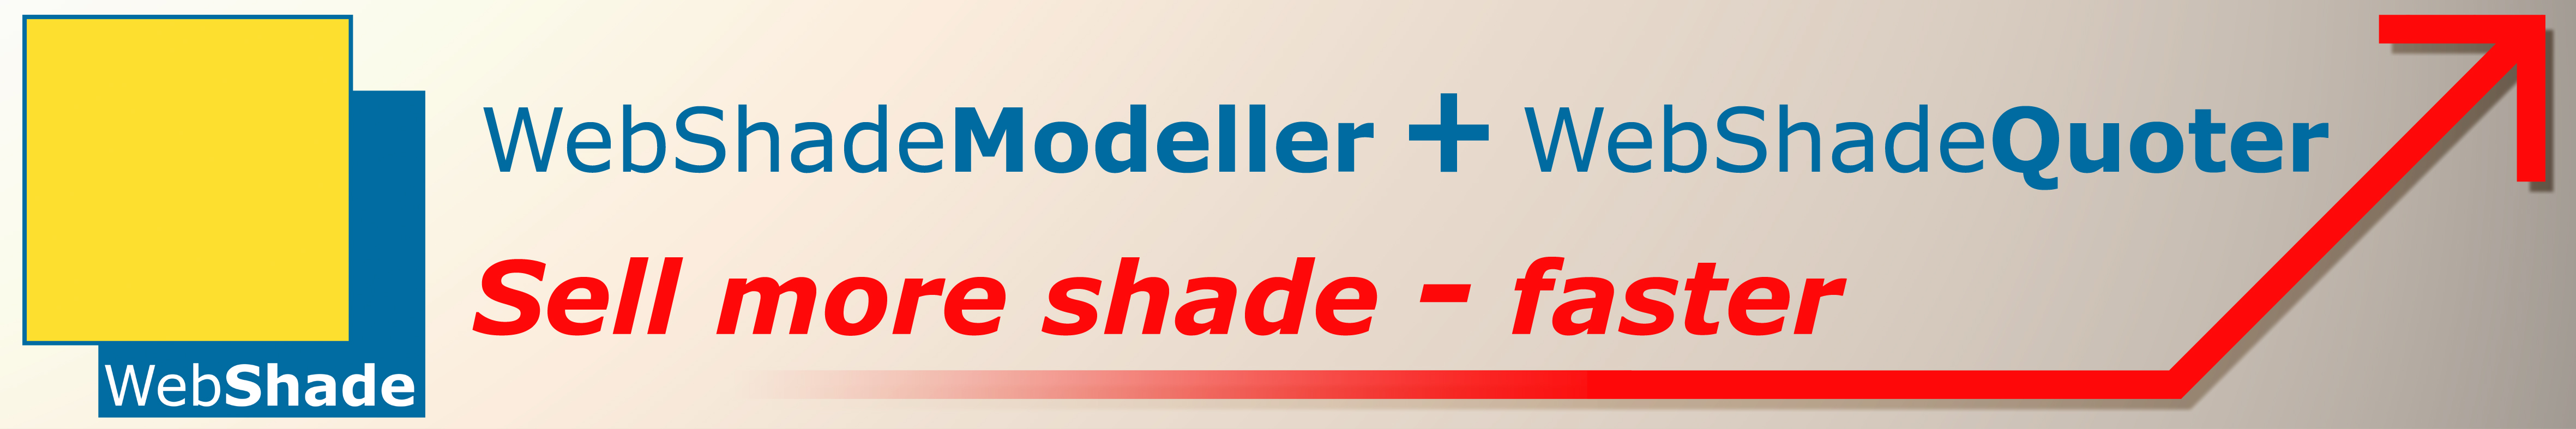 Sell More Shade Faster